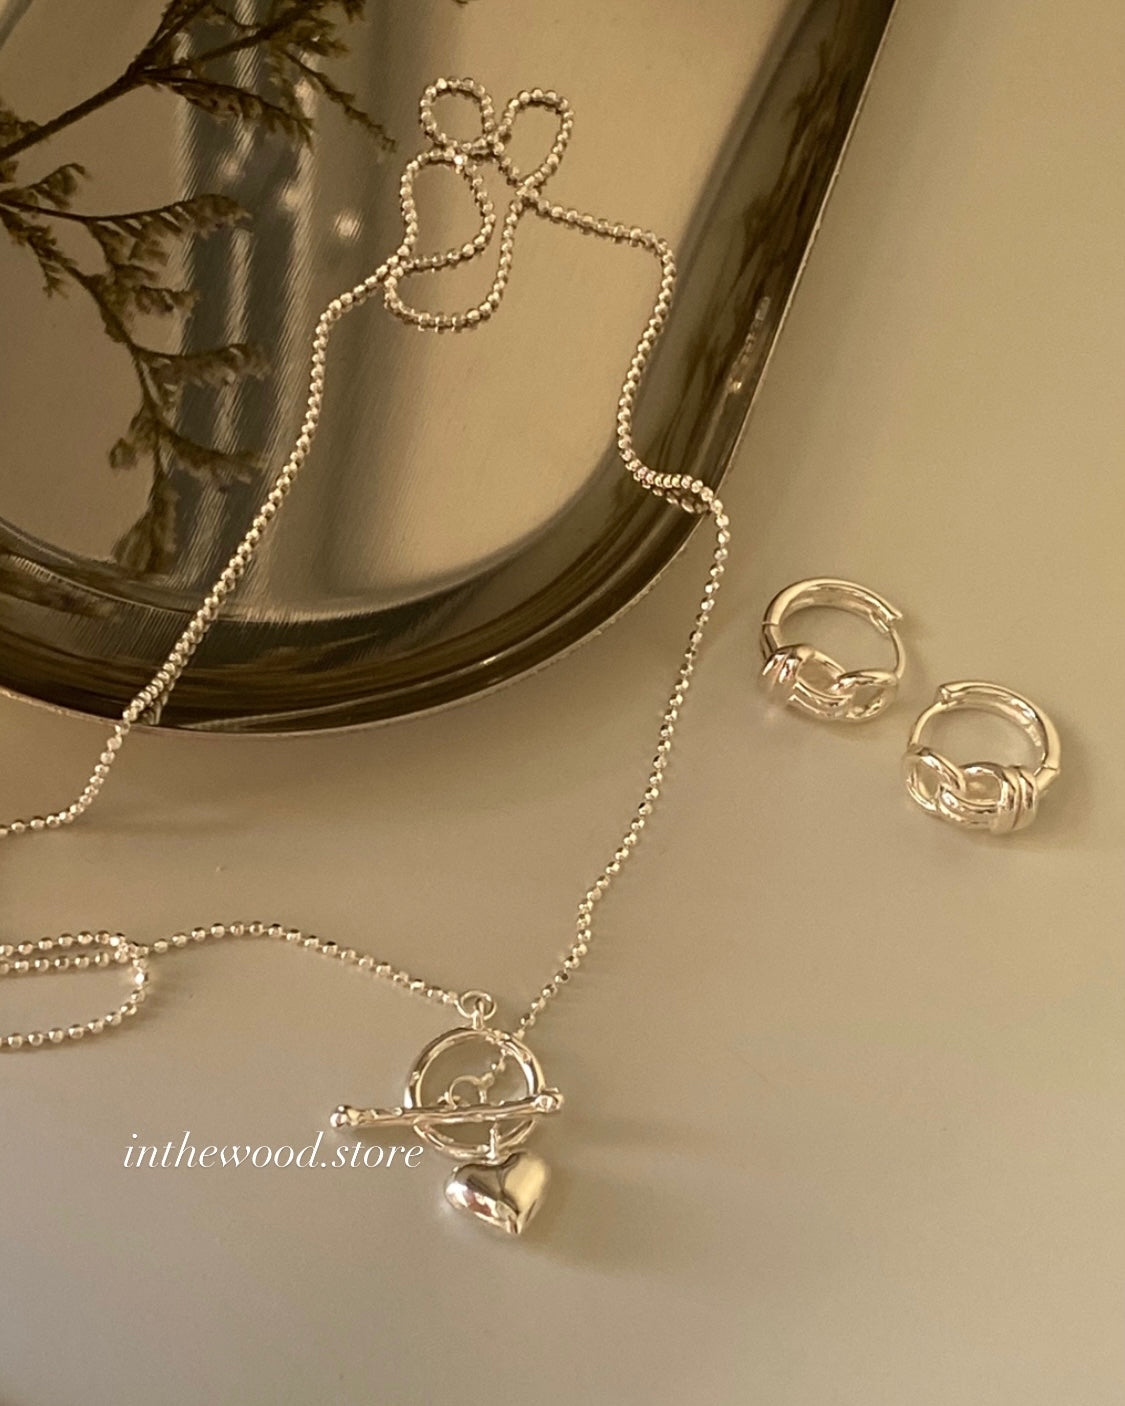 [925silver] Mini TO Heart Necklace